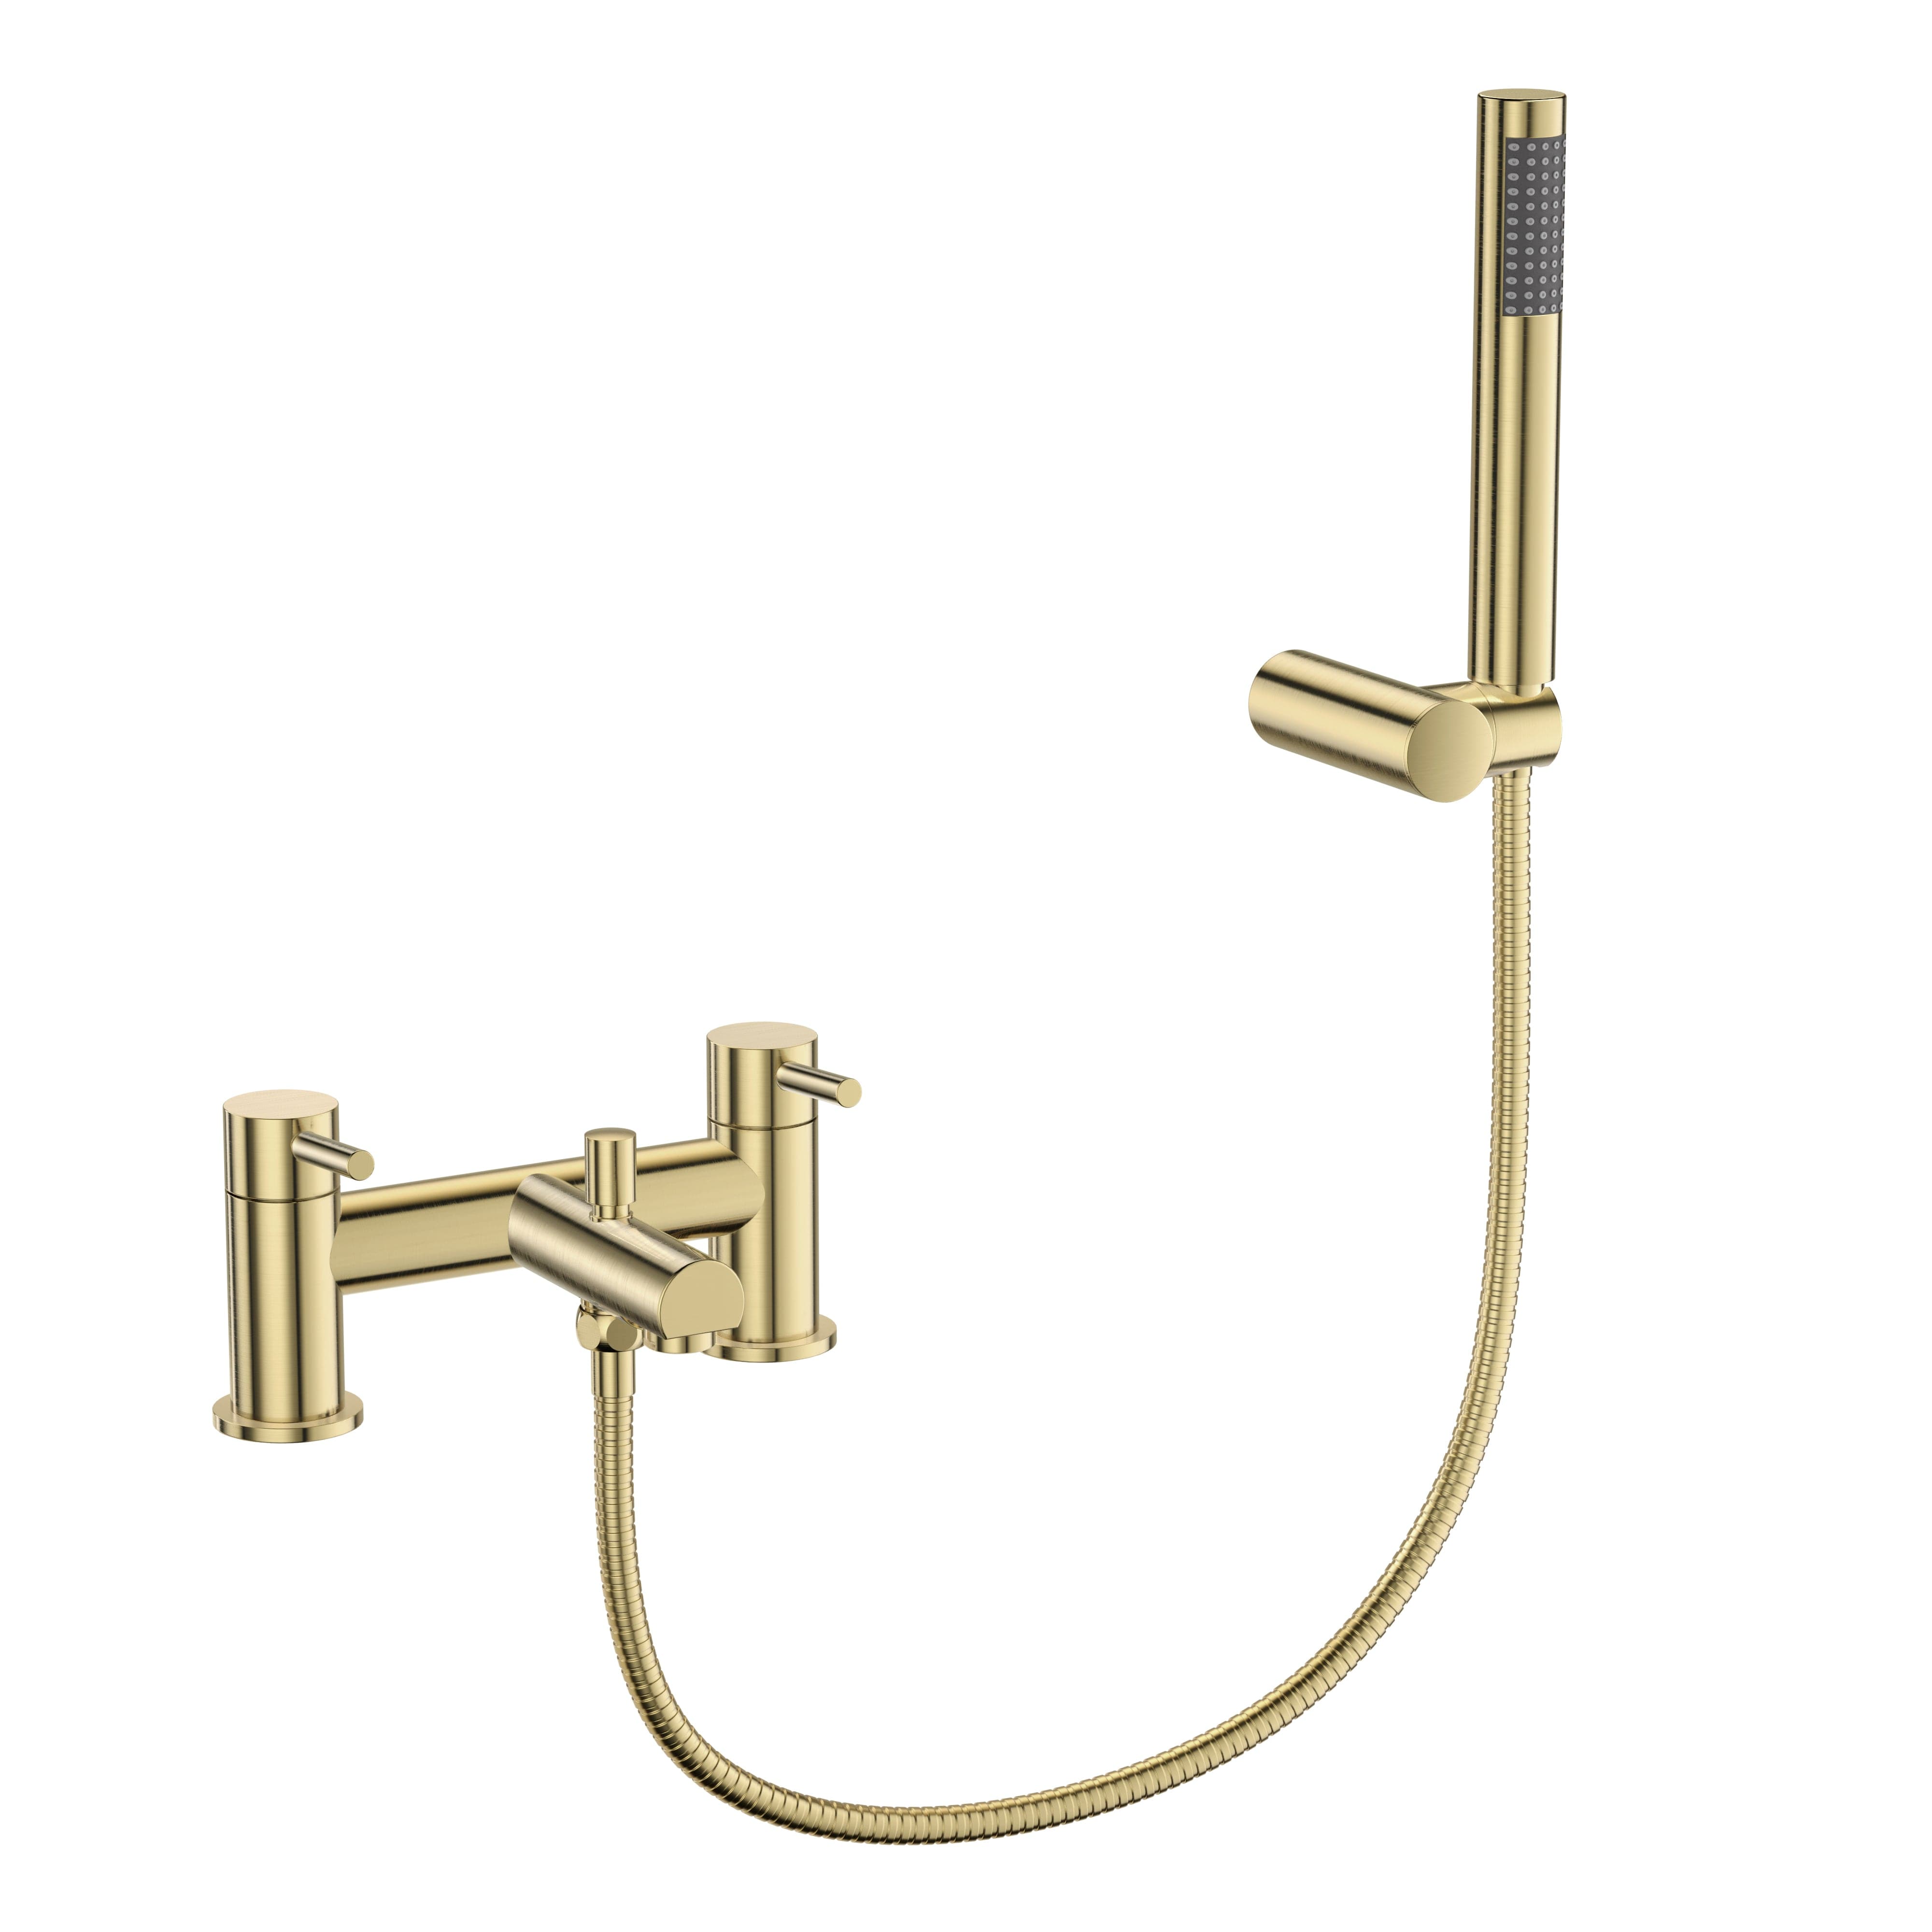 Dixon Round lever Bath Shower Mixer Tap with Kit - Brushed Brass